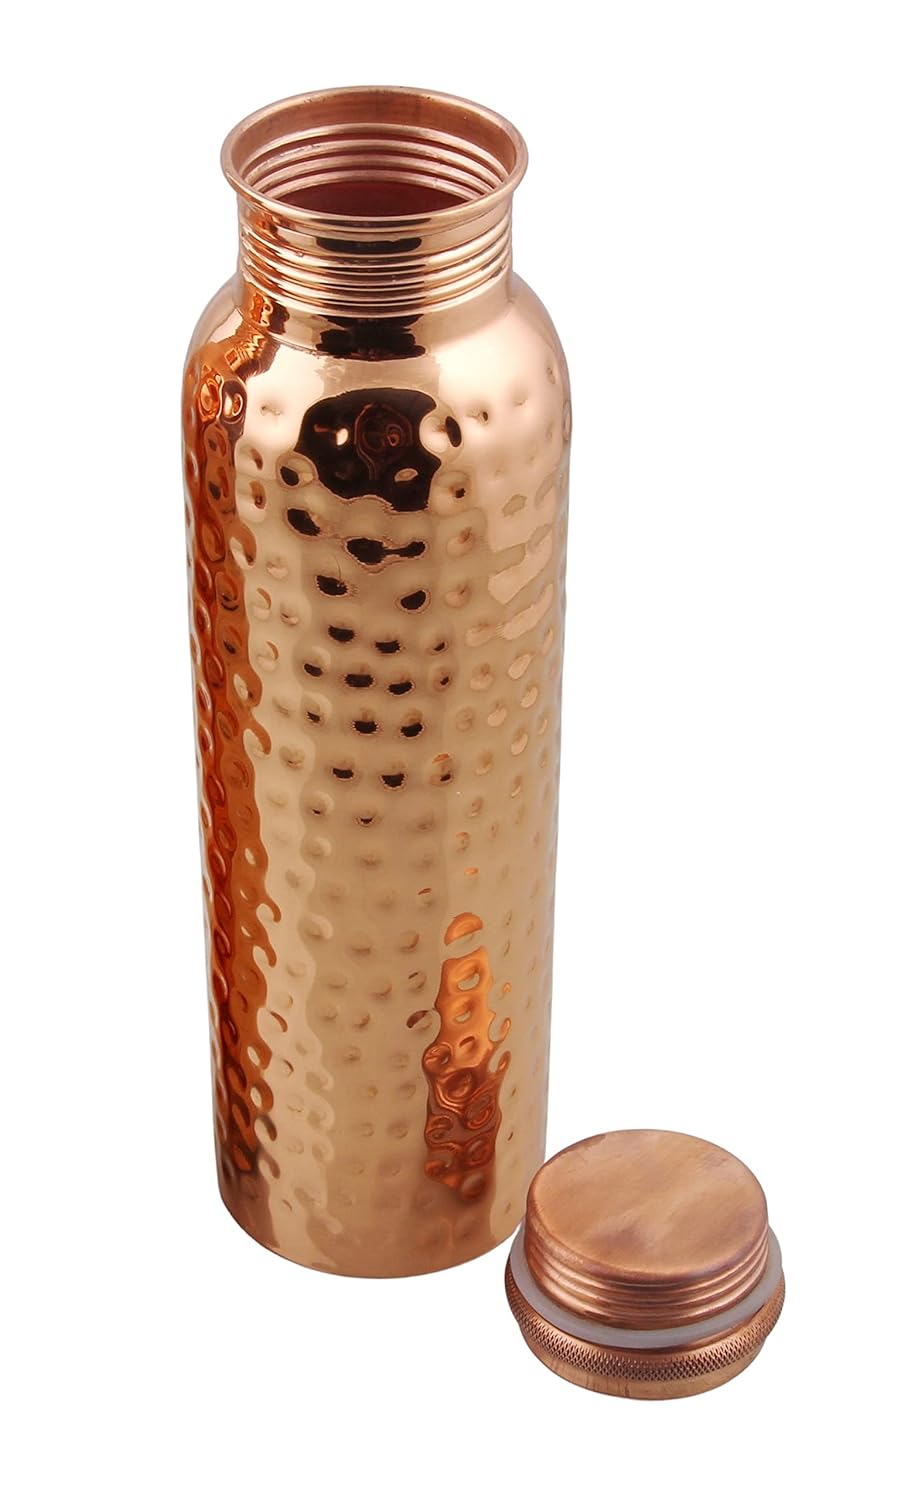 More-Eco Ayurvedic Pure Copper Water Bottles For Drinking Set Of 2 Pcs Hammered Shiny Finish And Plain Matte Finish Ayurveda Health Pitcher For Sport Gym & Yoga Leak-Proof Set, Copper 950 ML Each